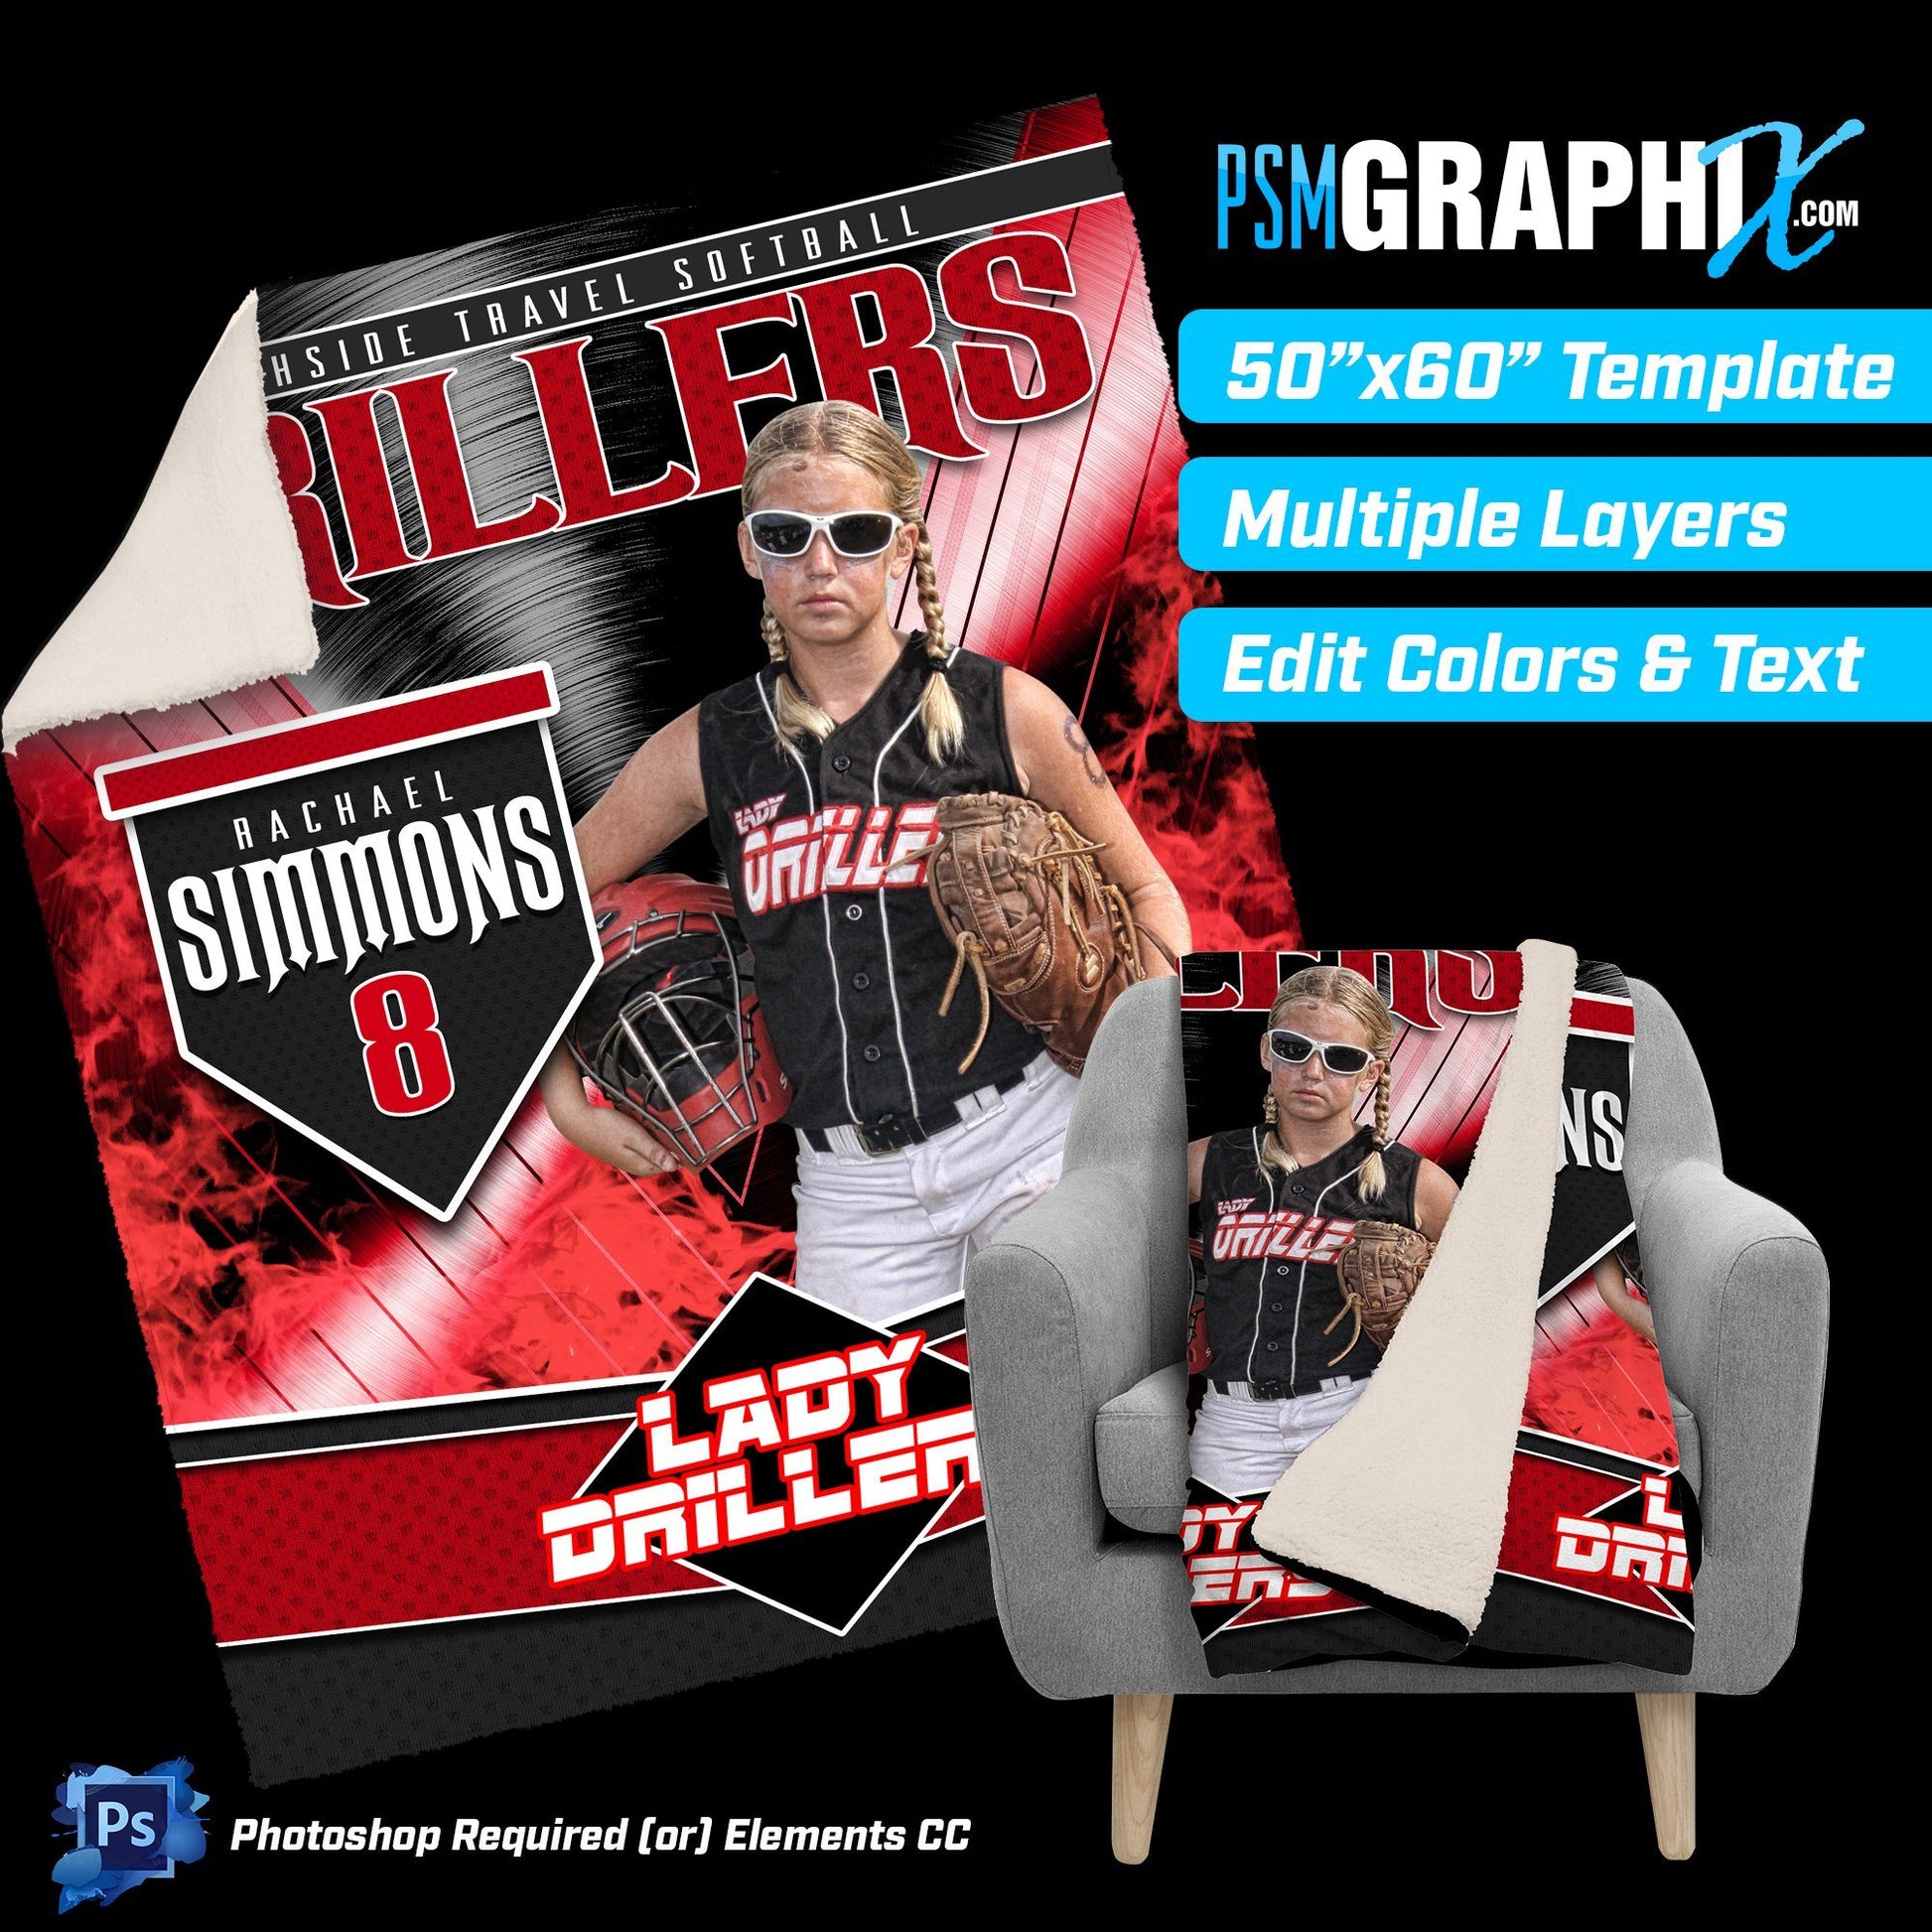 V4 - Spin - 50"x60" Blanket Template-Photoshop Template - PSMGraphix